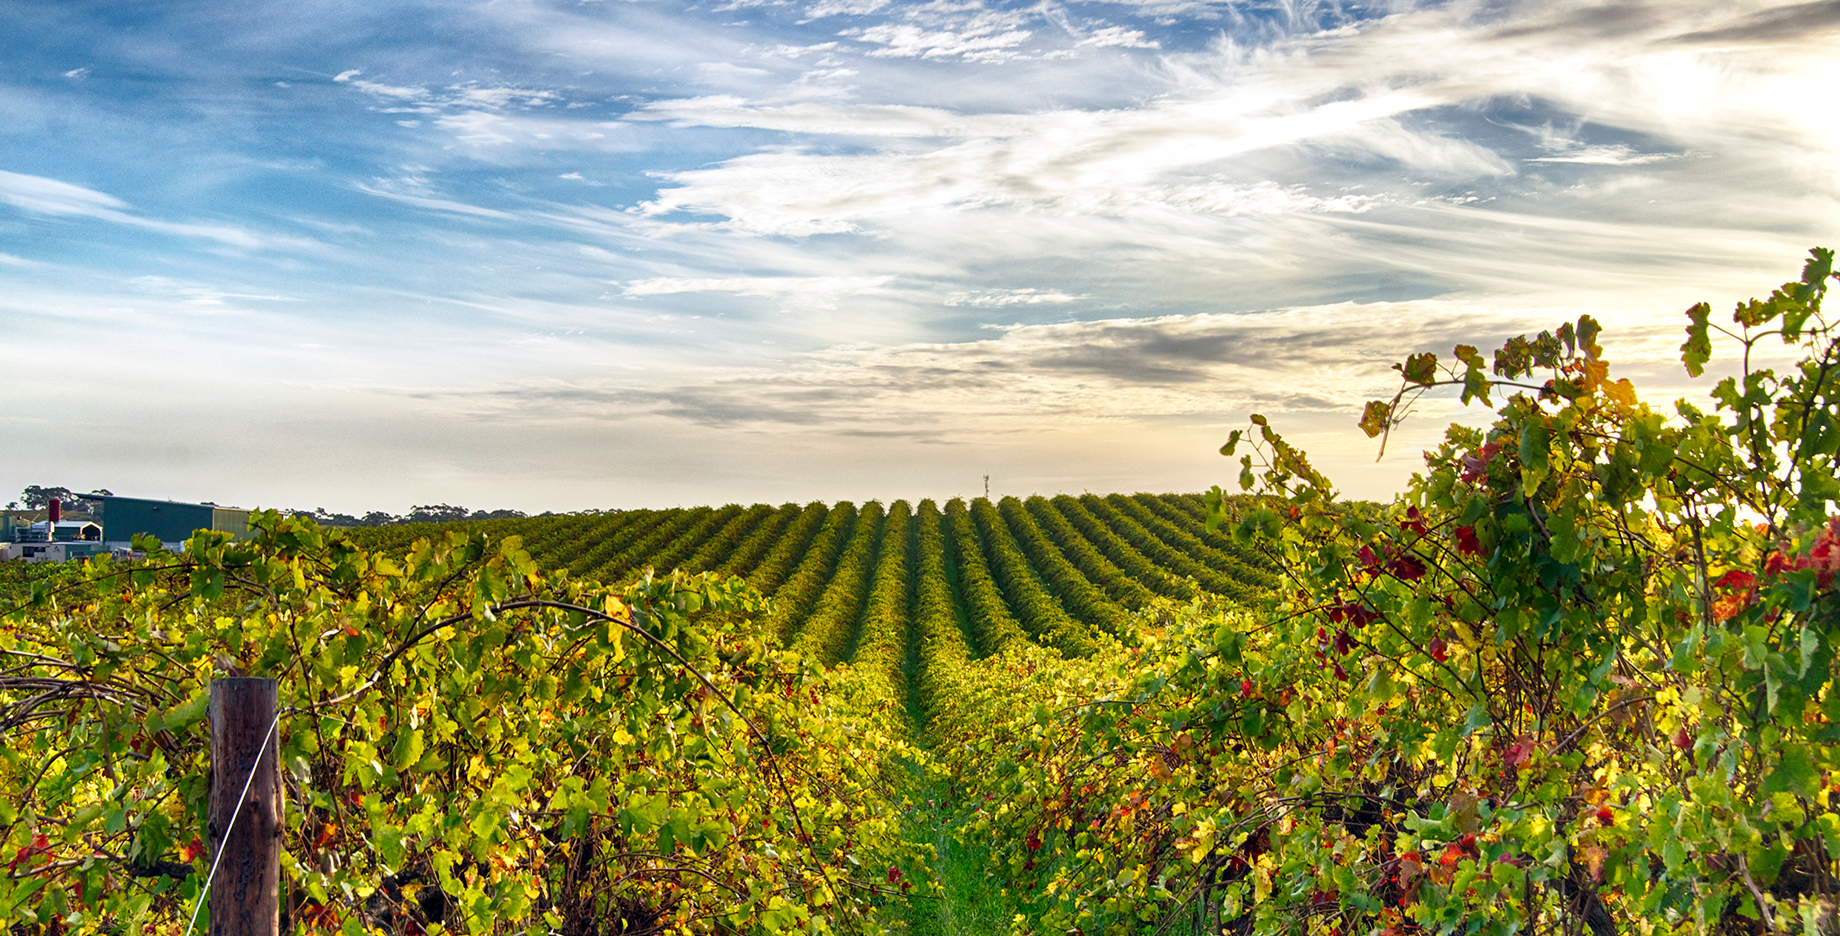 Beautiful green vineyard with a blue sky and swirly clouds